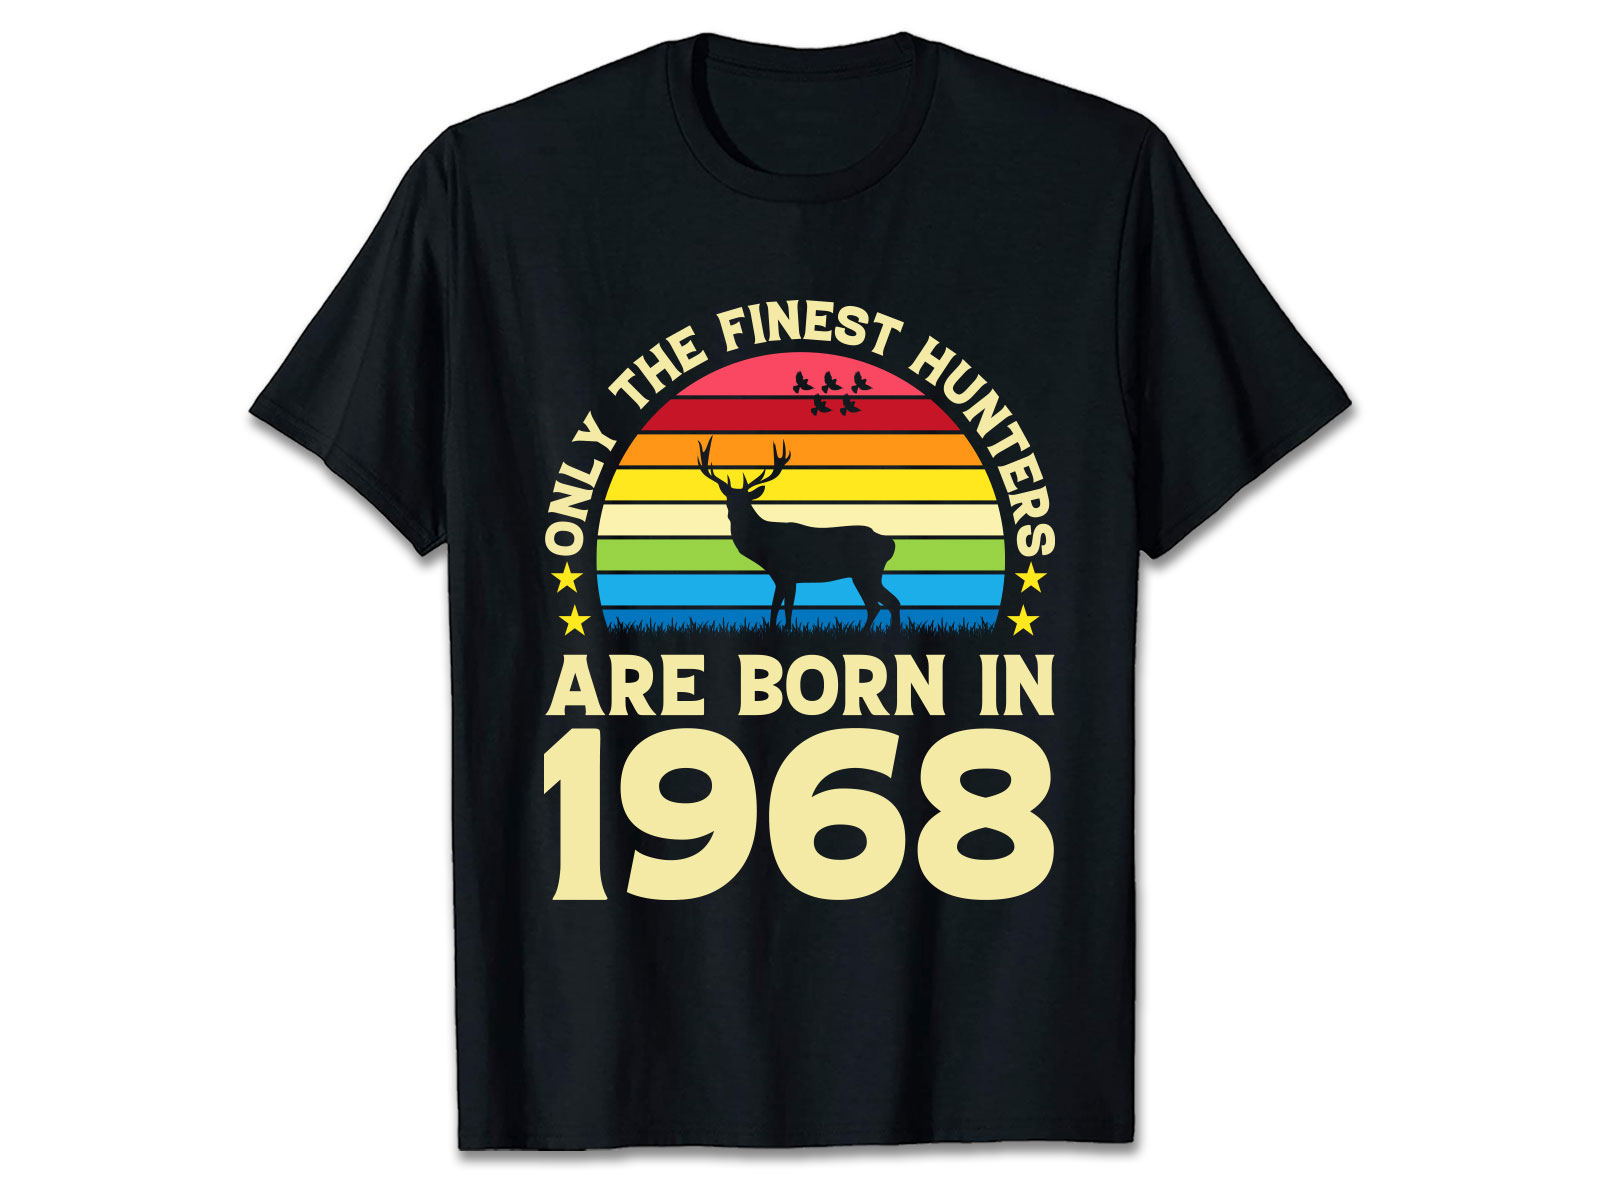 only the finest hunters are born in 1968 575